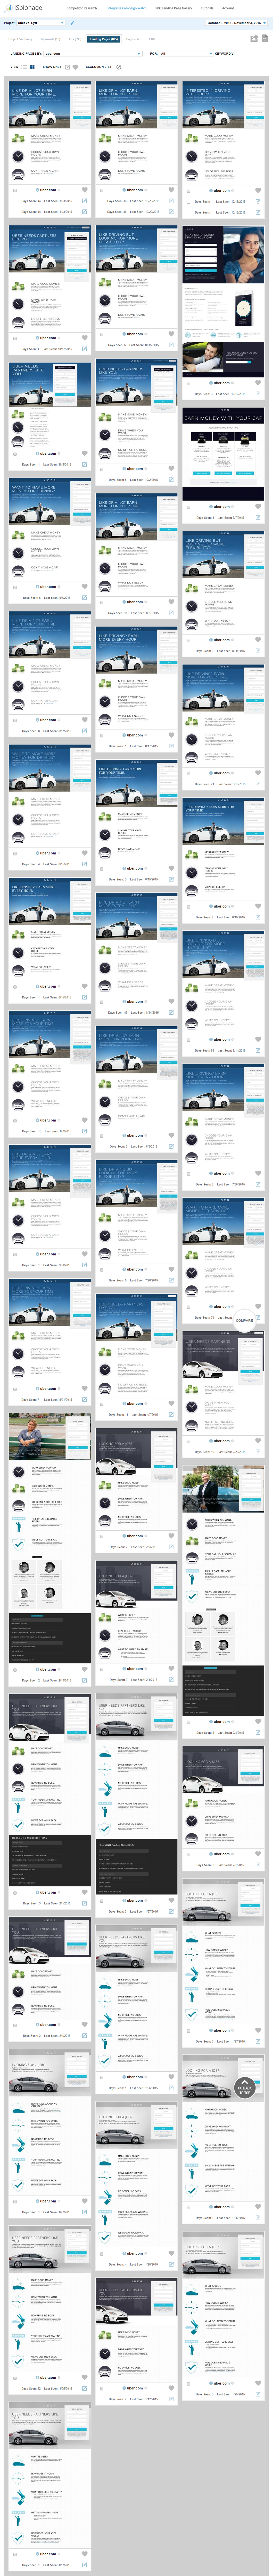 Uber PPC Landing Pages